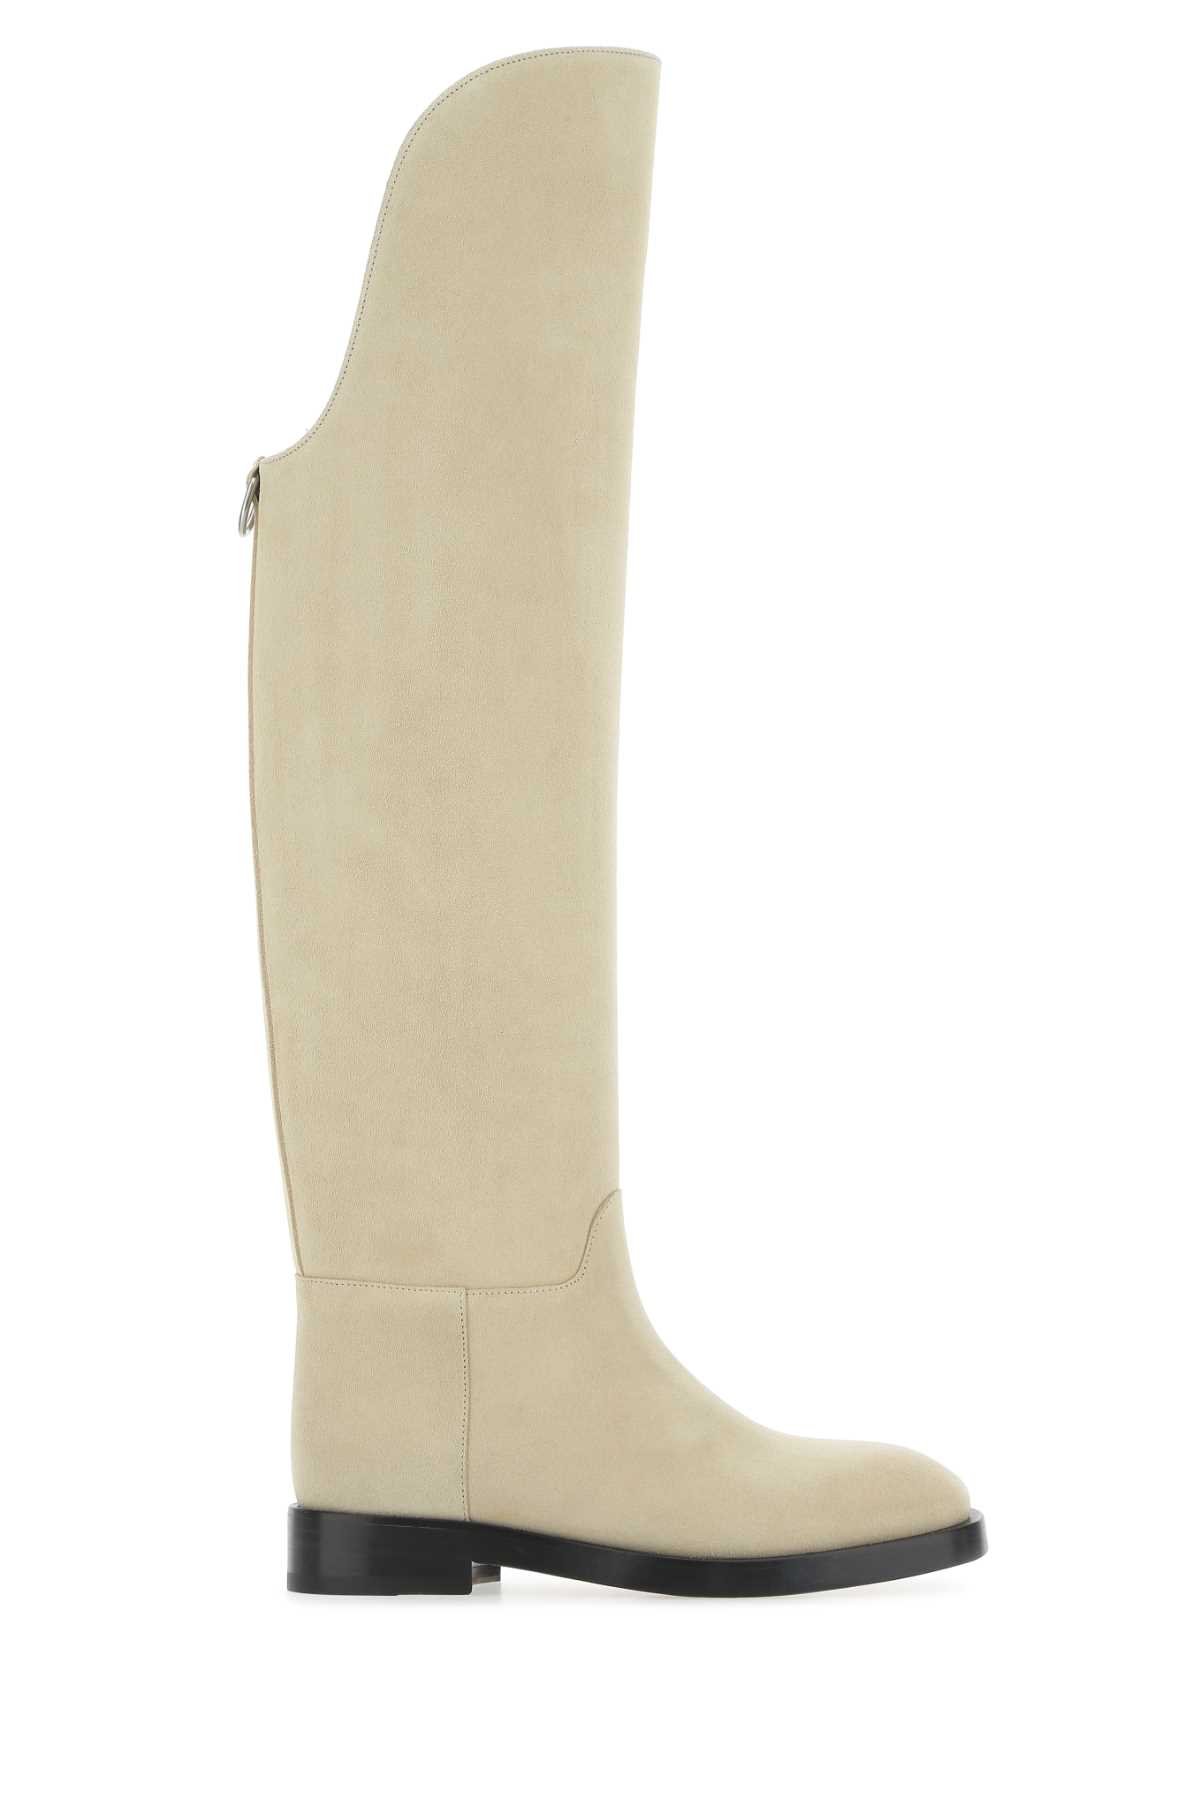 Sand Suede Equestrian Boots